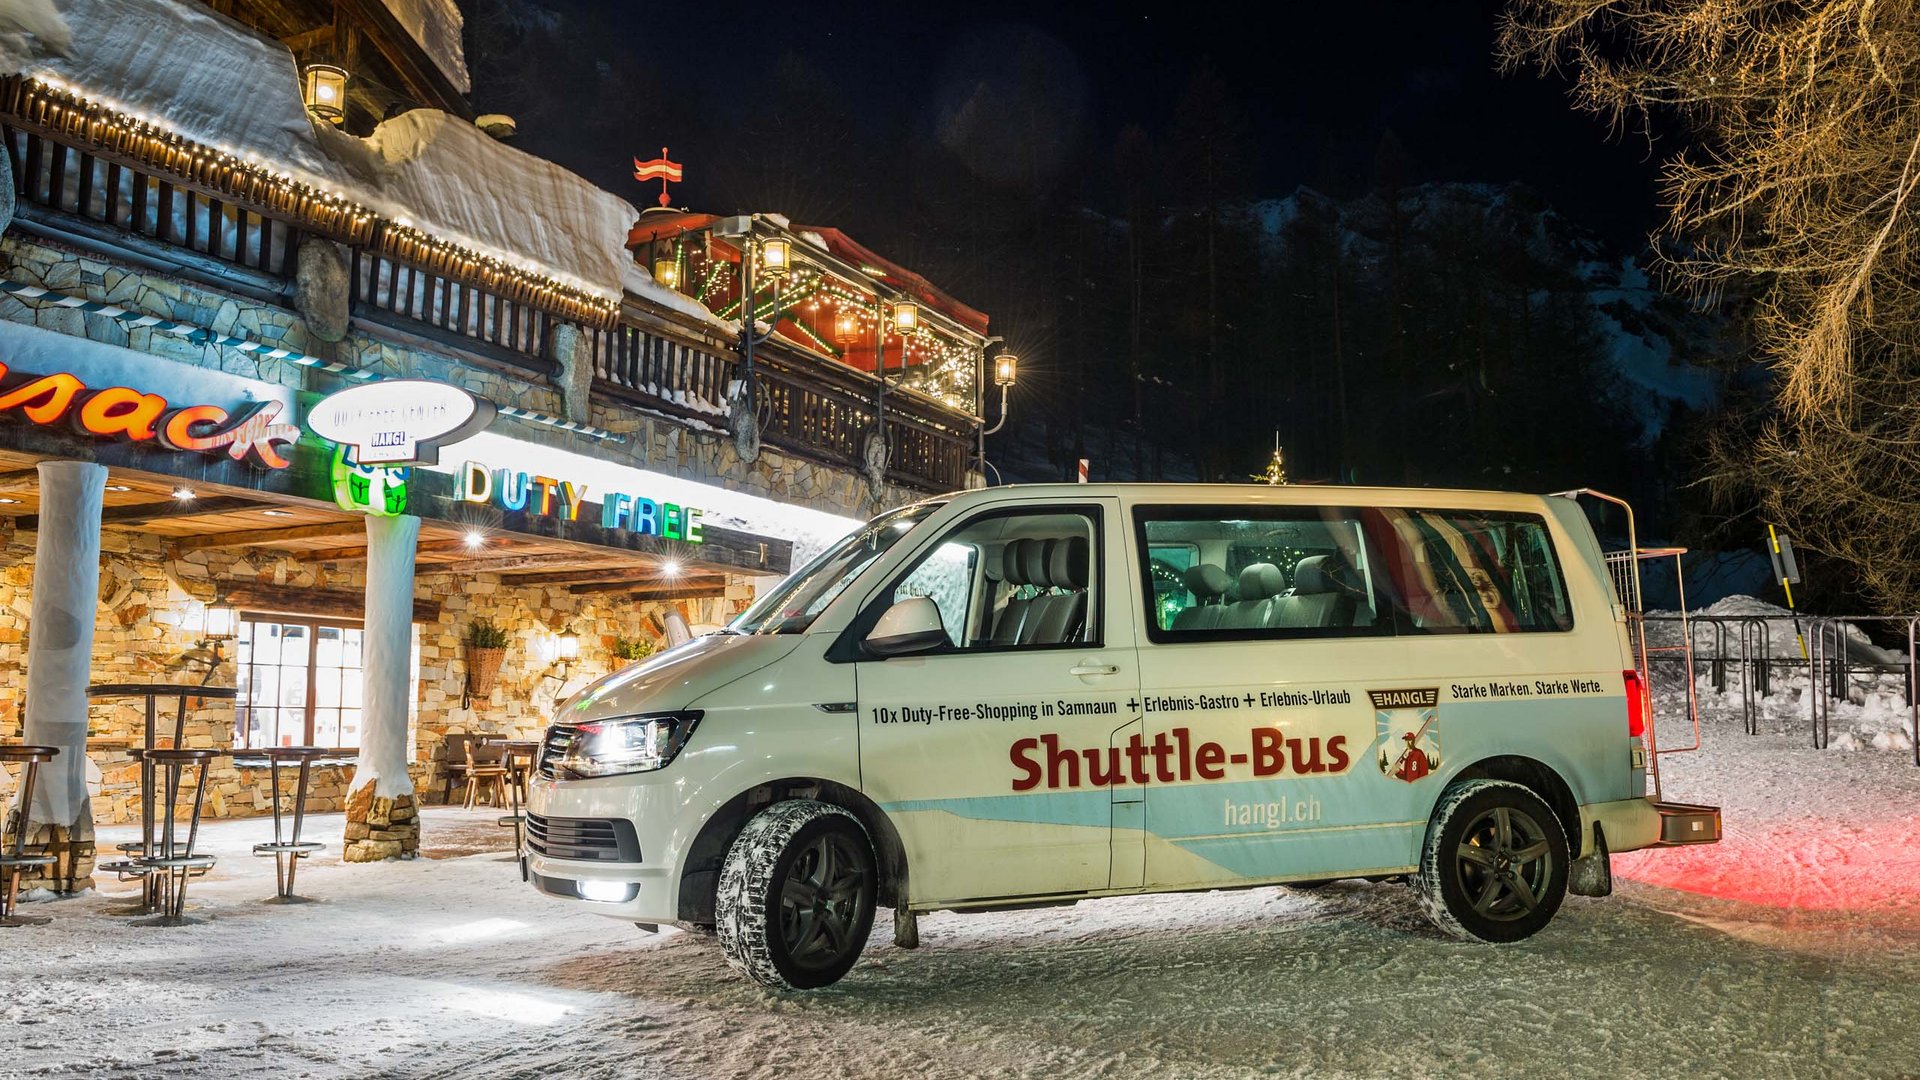 Shop for duty-free ski boots & more with our shuttle service